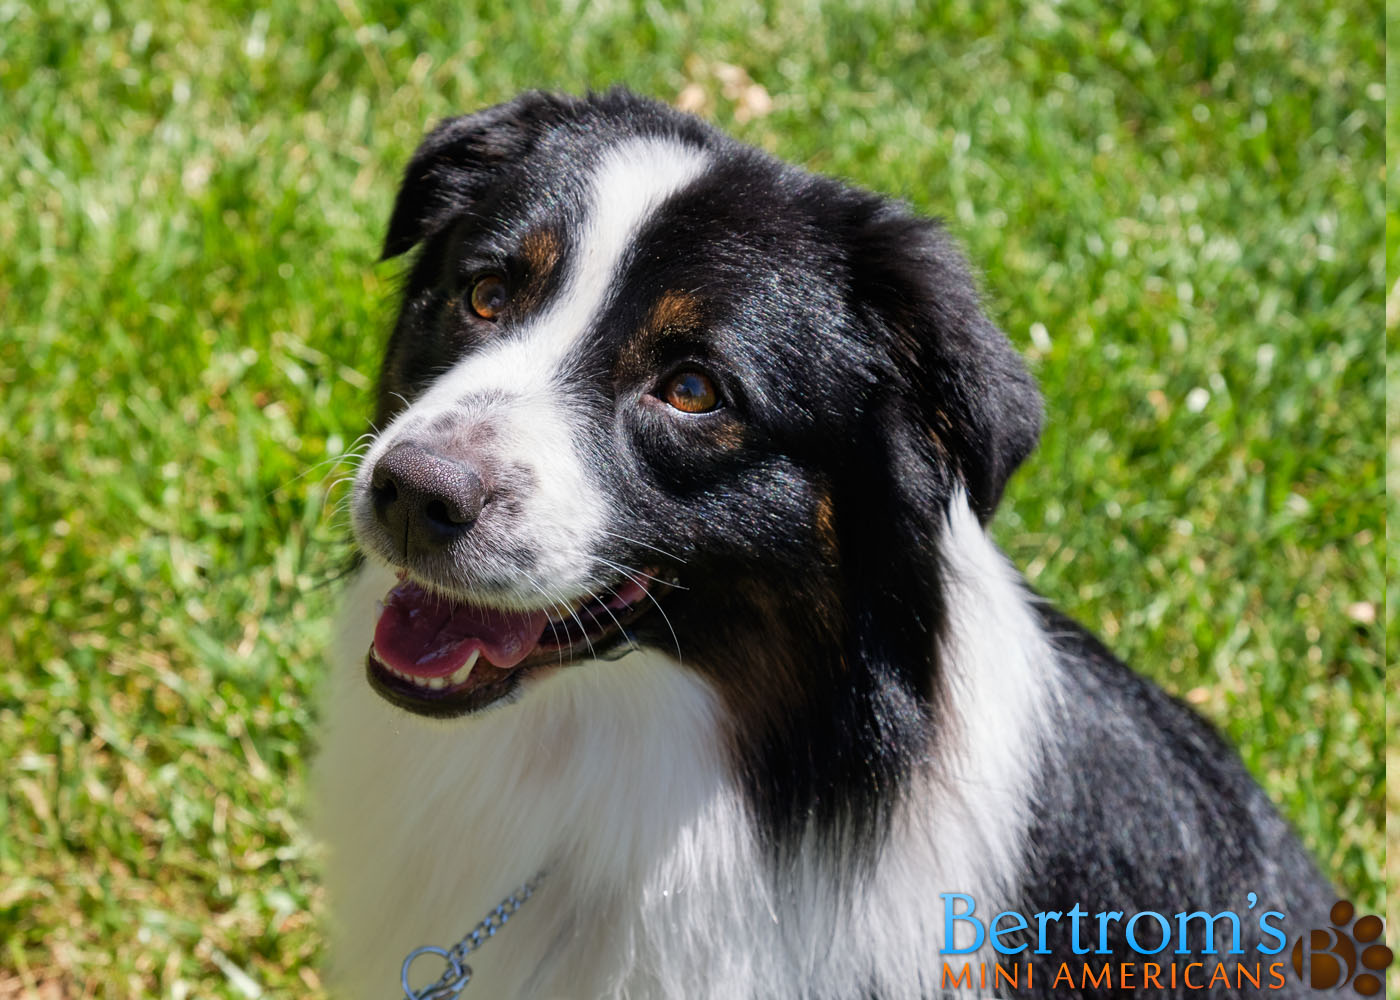 Bertrom's Up Close and Personal, Mini American Shepherd, at a park